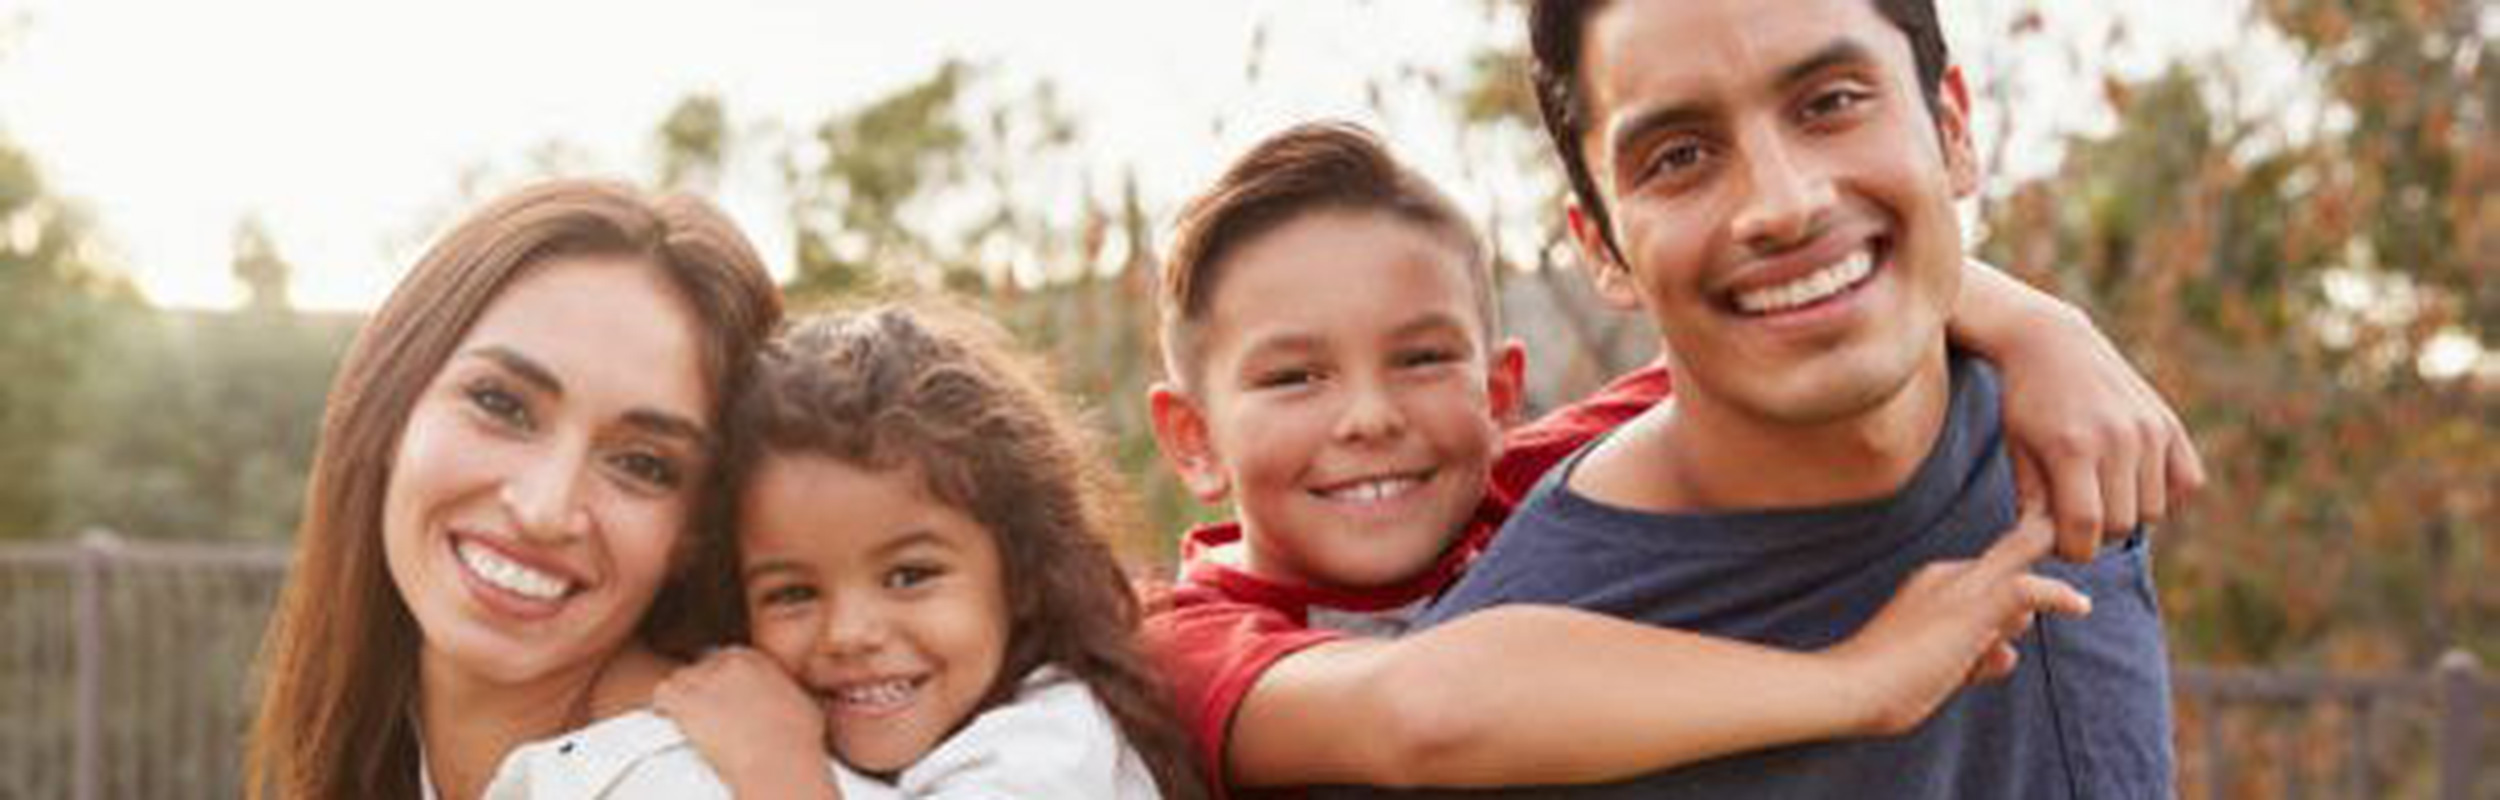 Three Ways the Whole Family Approach Builds Resilience